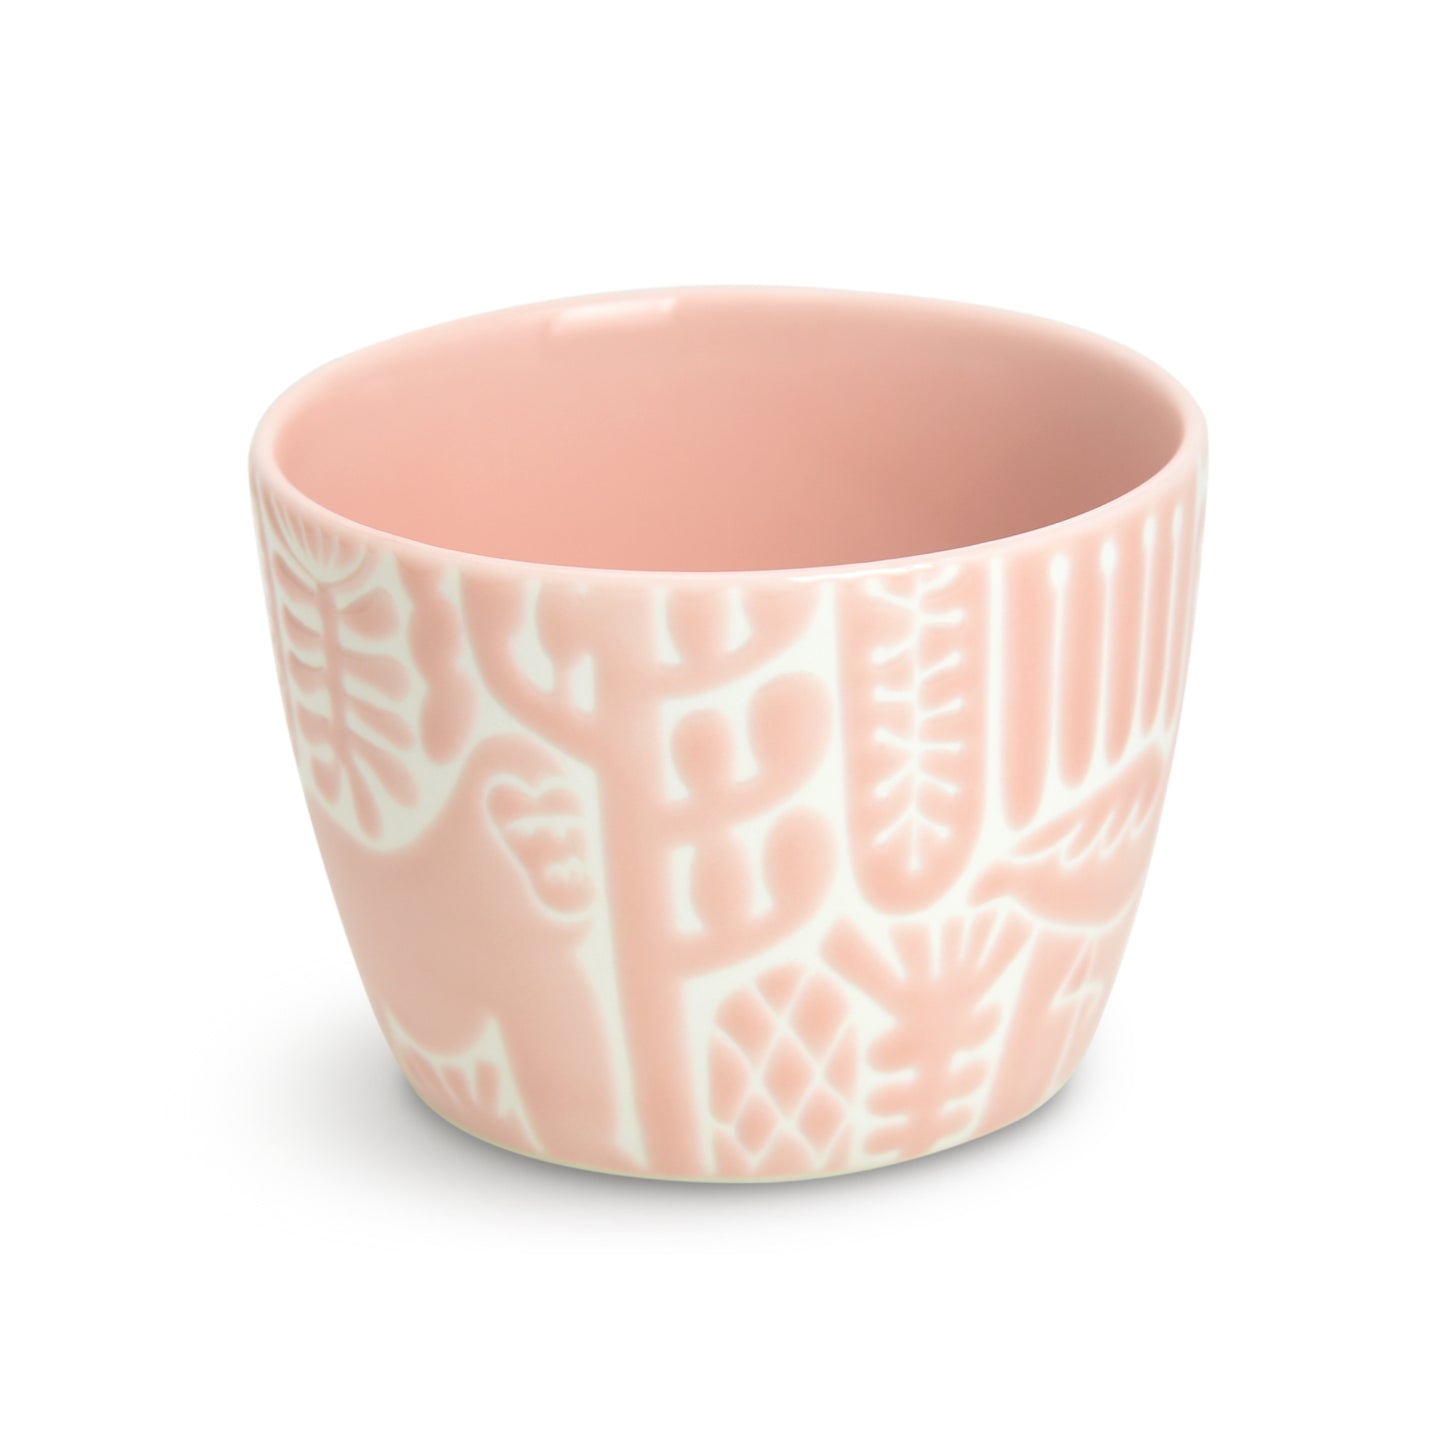 [natural69] [Utopia] [Cup] Hasami Ware Natural 69 Buckwheat Soba Mouth Free Cup Rock Cup Animal Pattern Fashionable Adult Colorful Cute